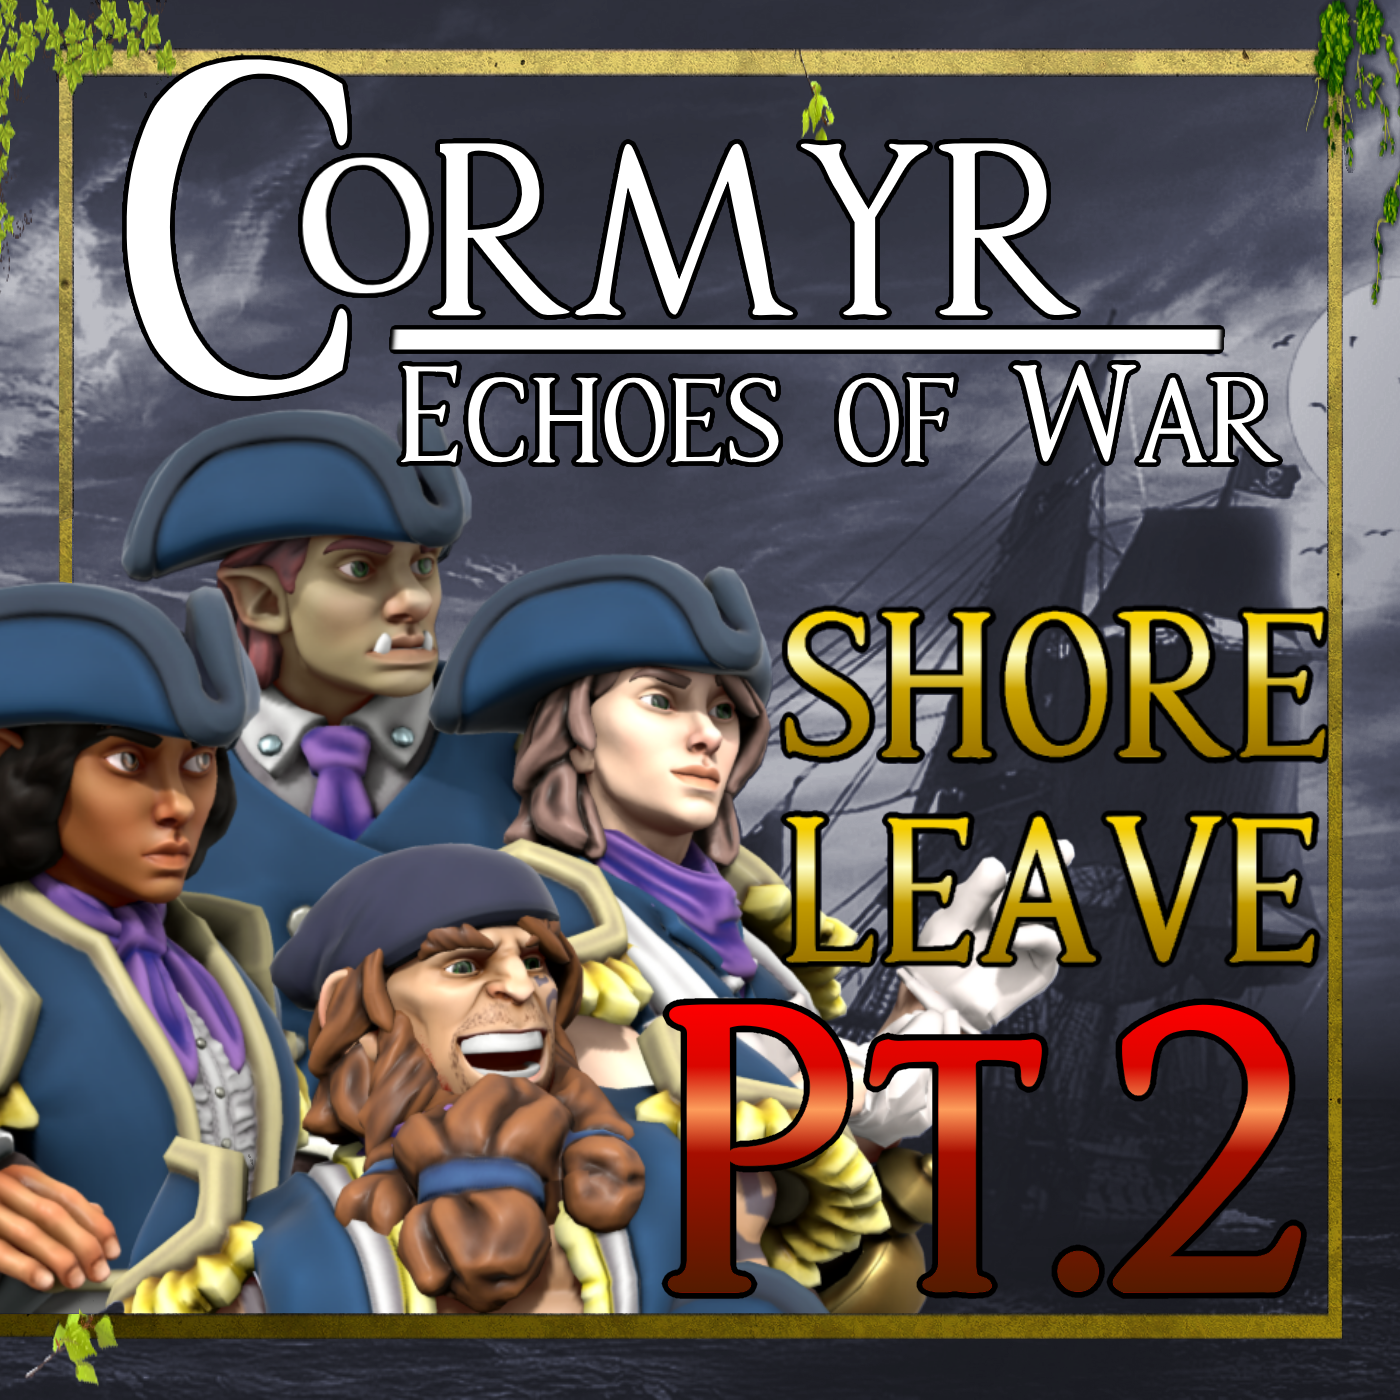 Cormyr: Echoes of War - Shore Leave Pt.2